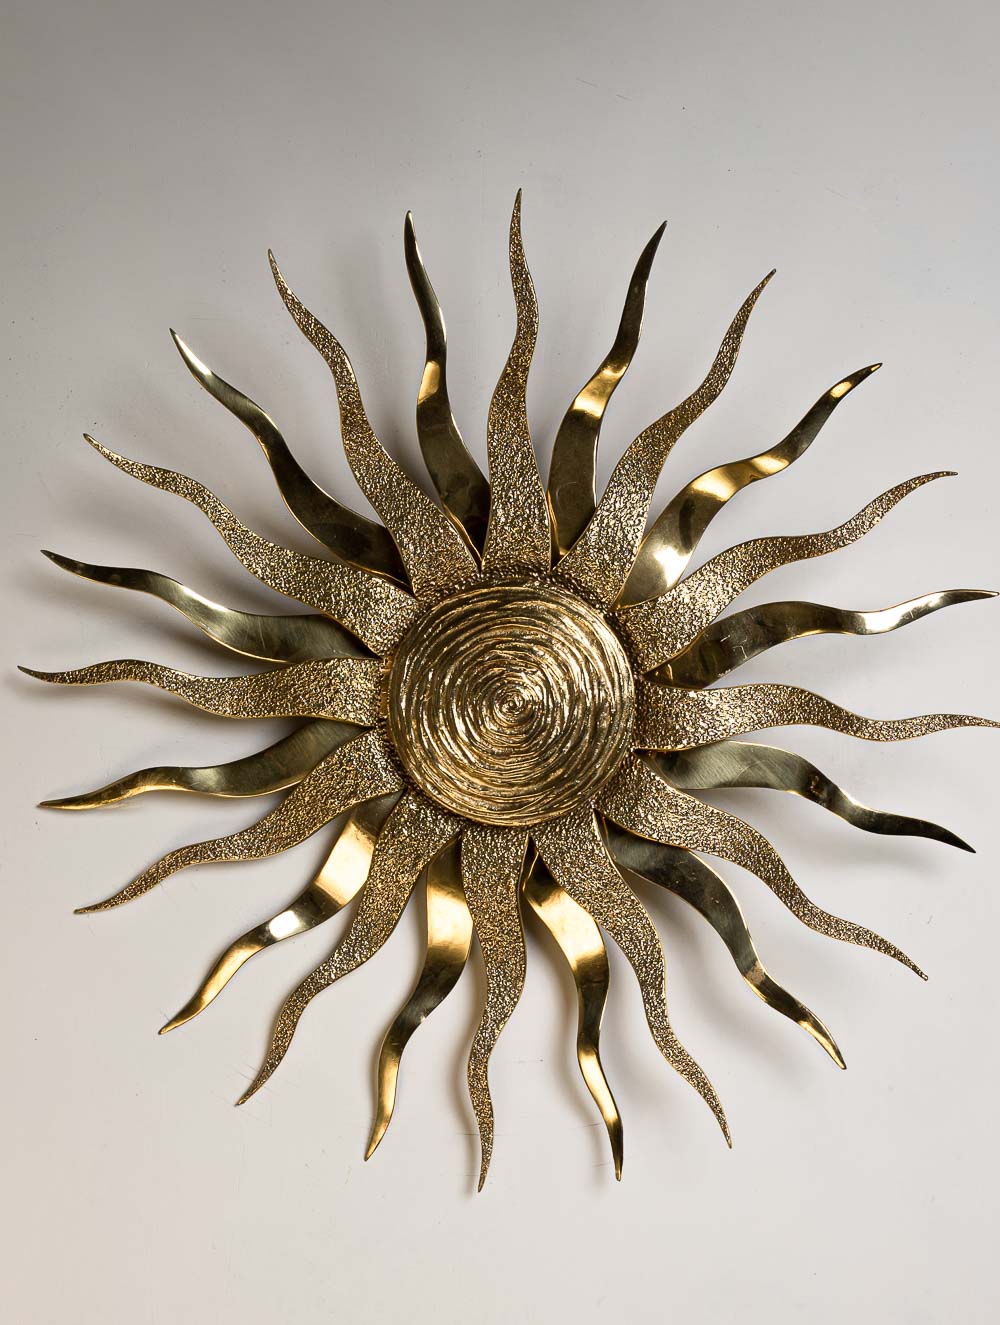 Load image into Gallery viewer, Exclusive Brass Wall Accent - Glory Of The Sun (Large)